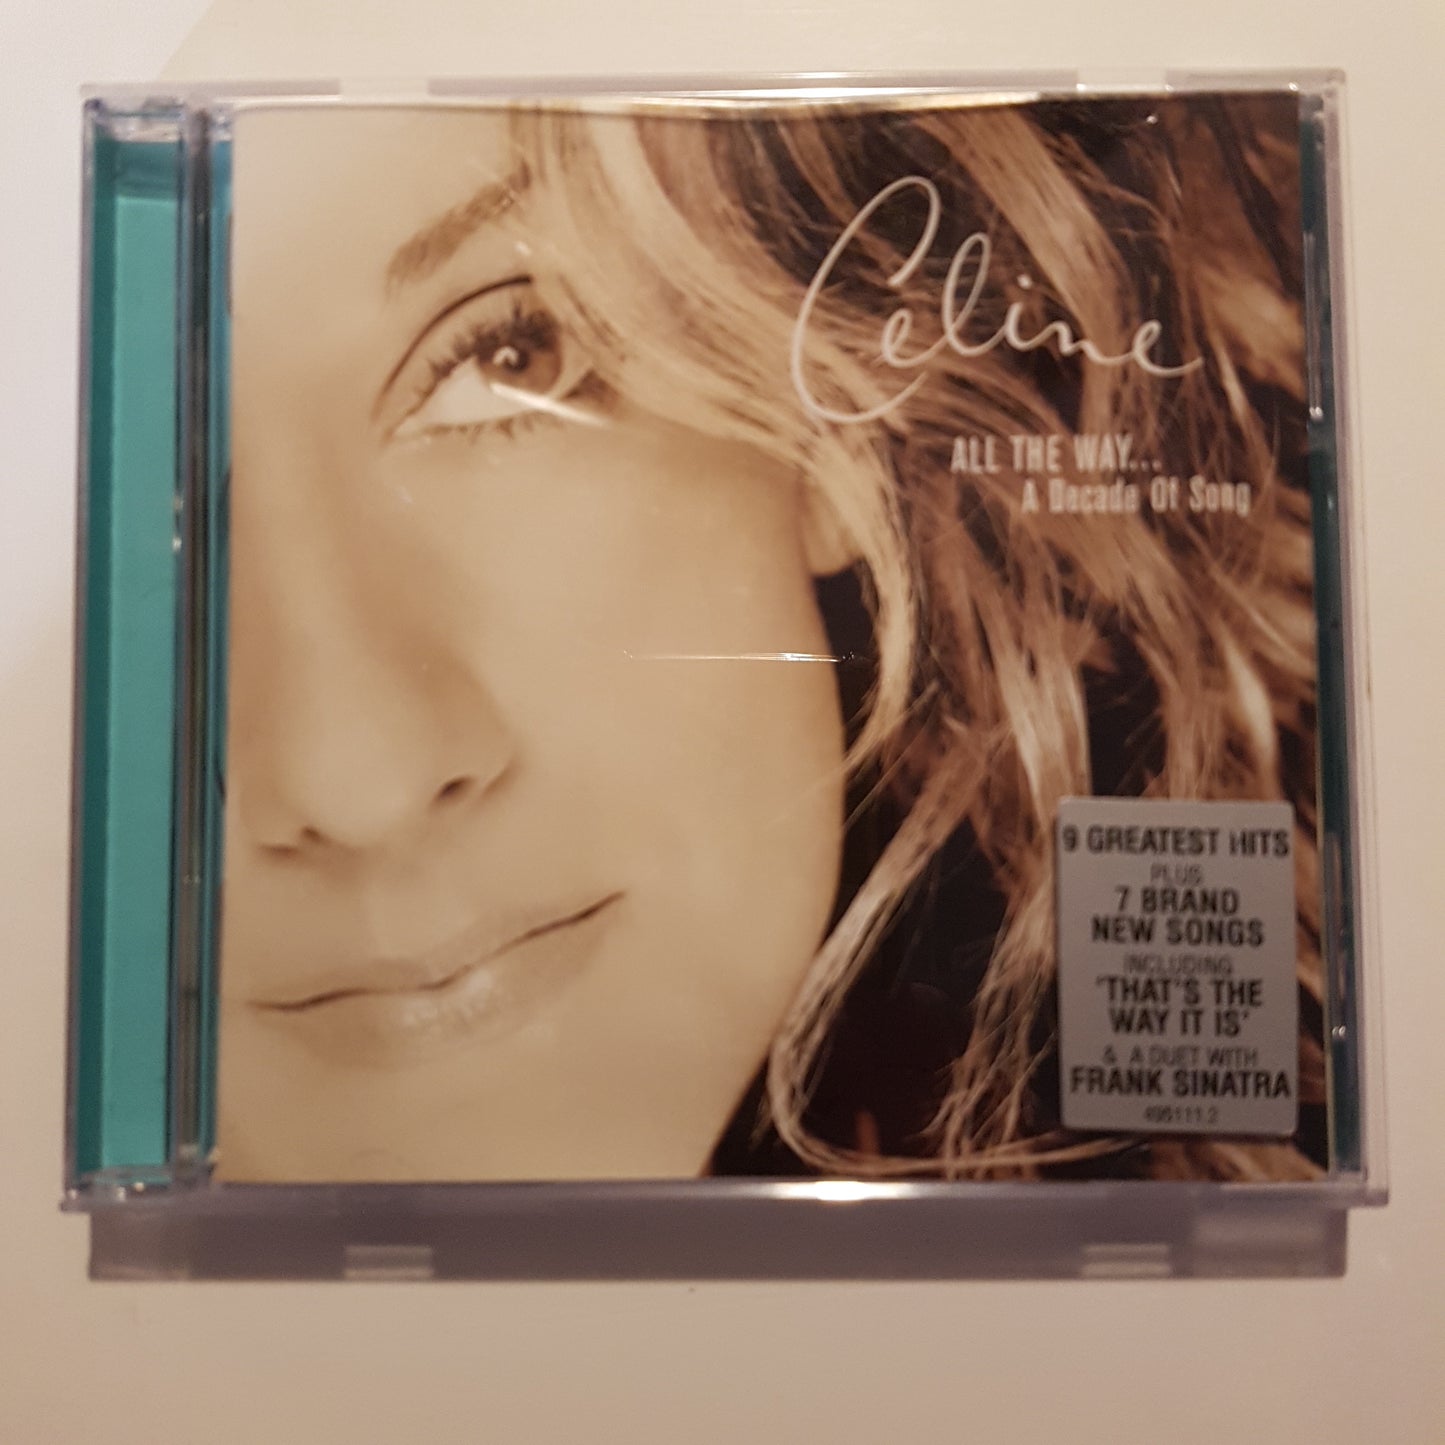 Celine, ALL THE WAY... A Decade Of Song (1CD)